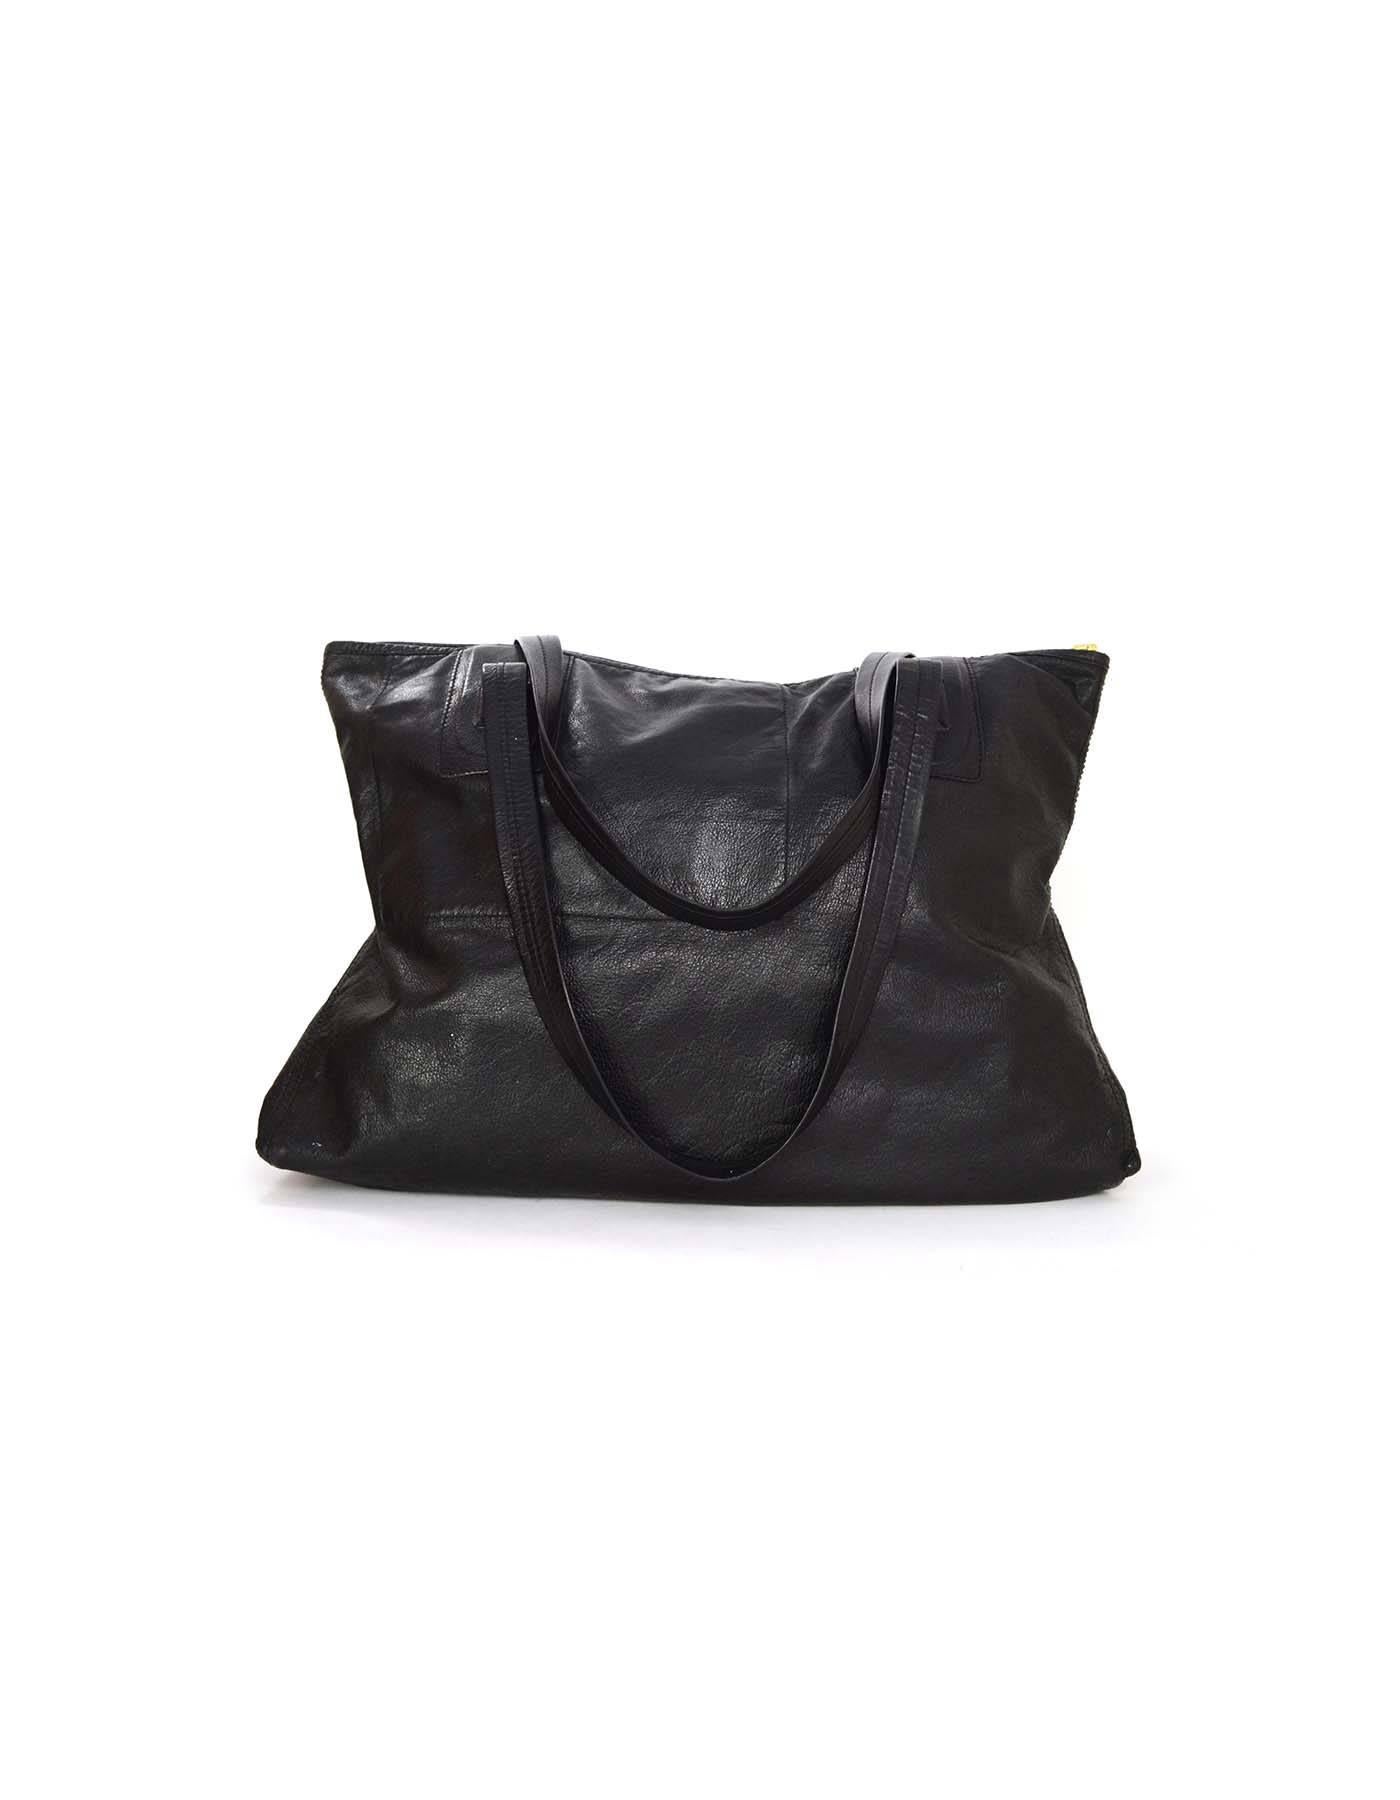 Rick Owens Black Distressed Leather Tote 
Made In: Italy
Color: Black
Hardware: Goldtone
Materials: Distressed leather
Lining: Black suede
Closure/Opening: Zip across top
Exterior Pockets: None
Interior Pockets: One zipper pocket
Serial